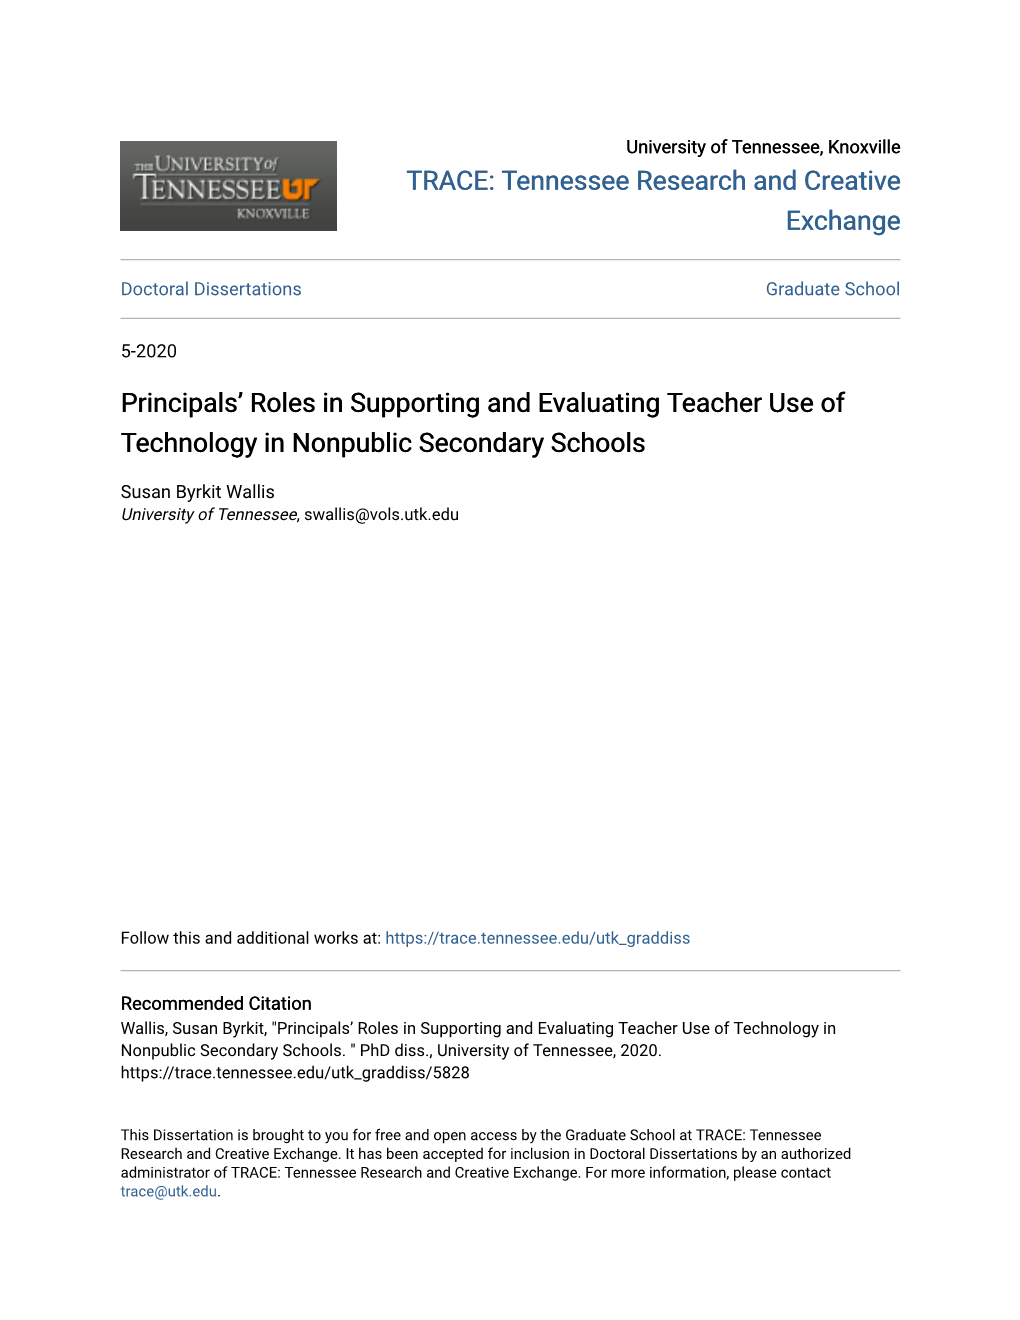 Principals' Roles in Supporting and Evaluating Teacher Use Of